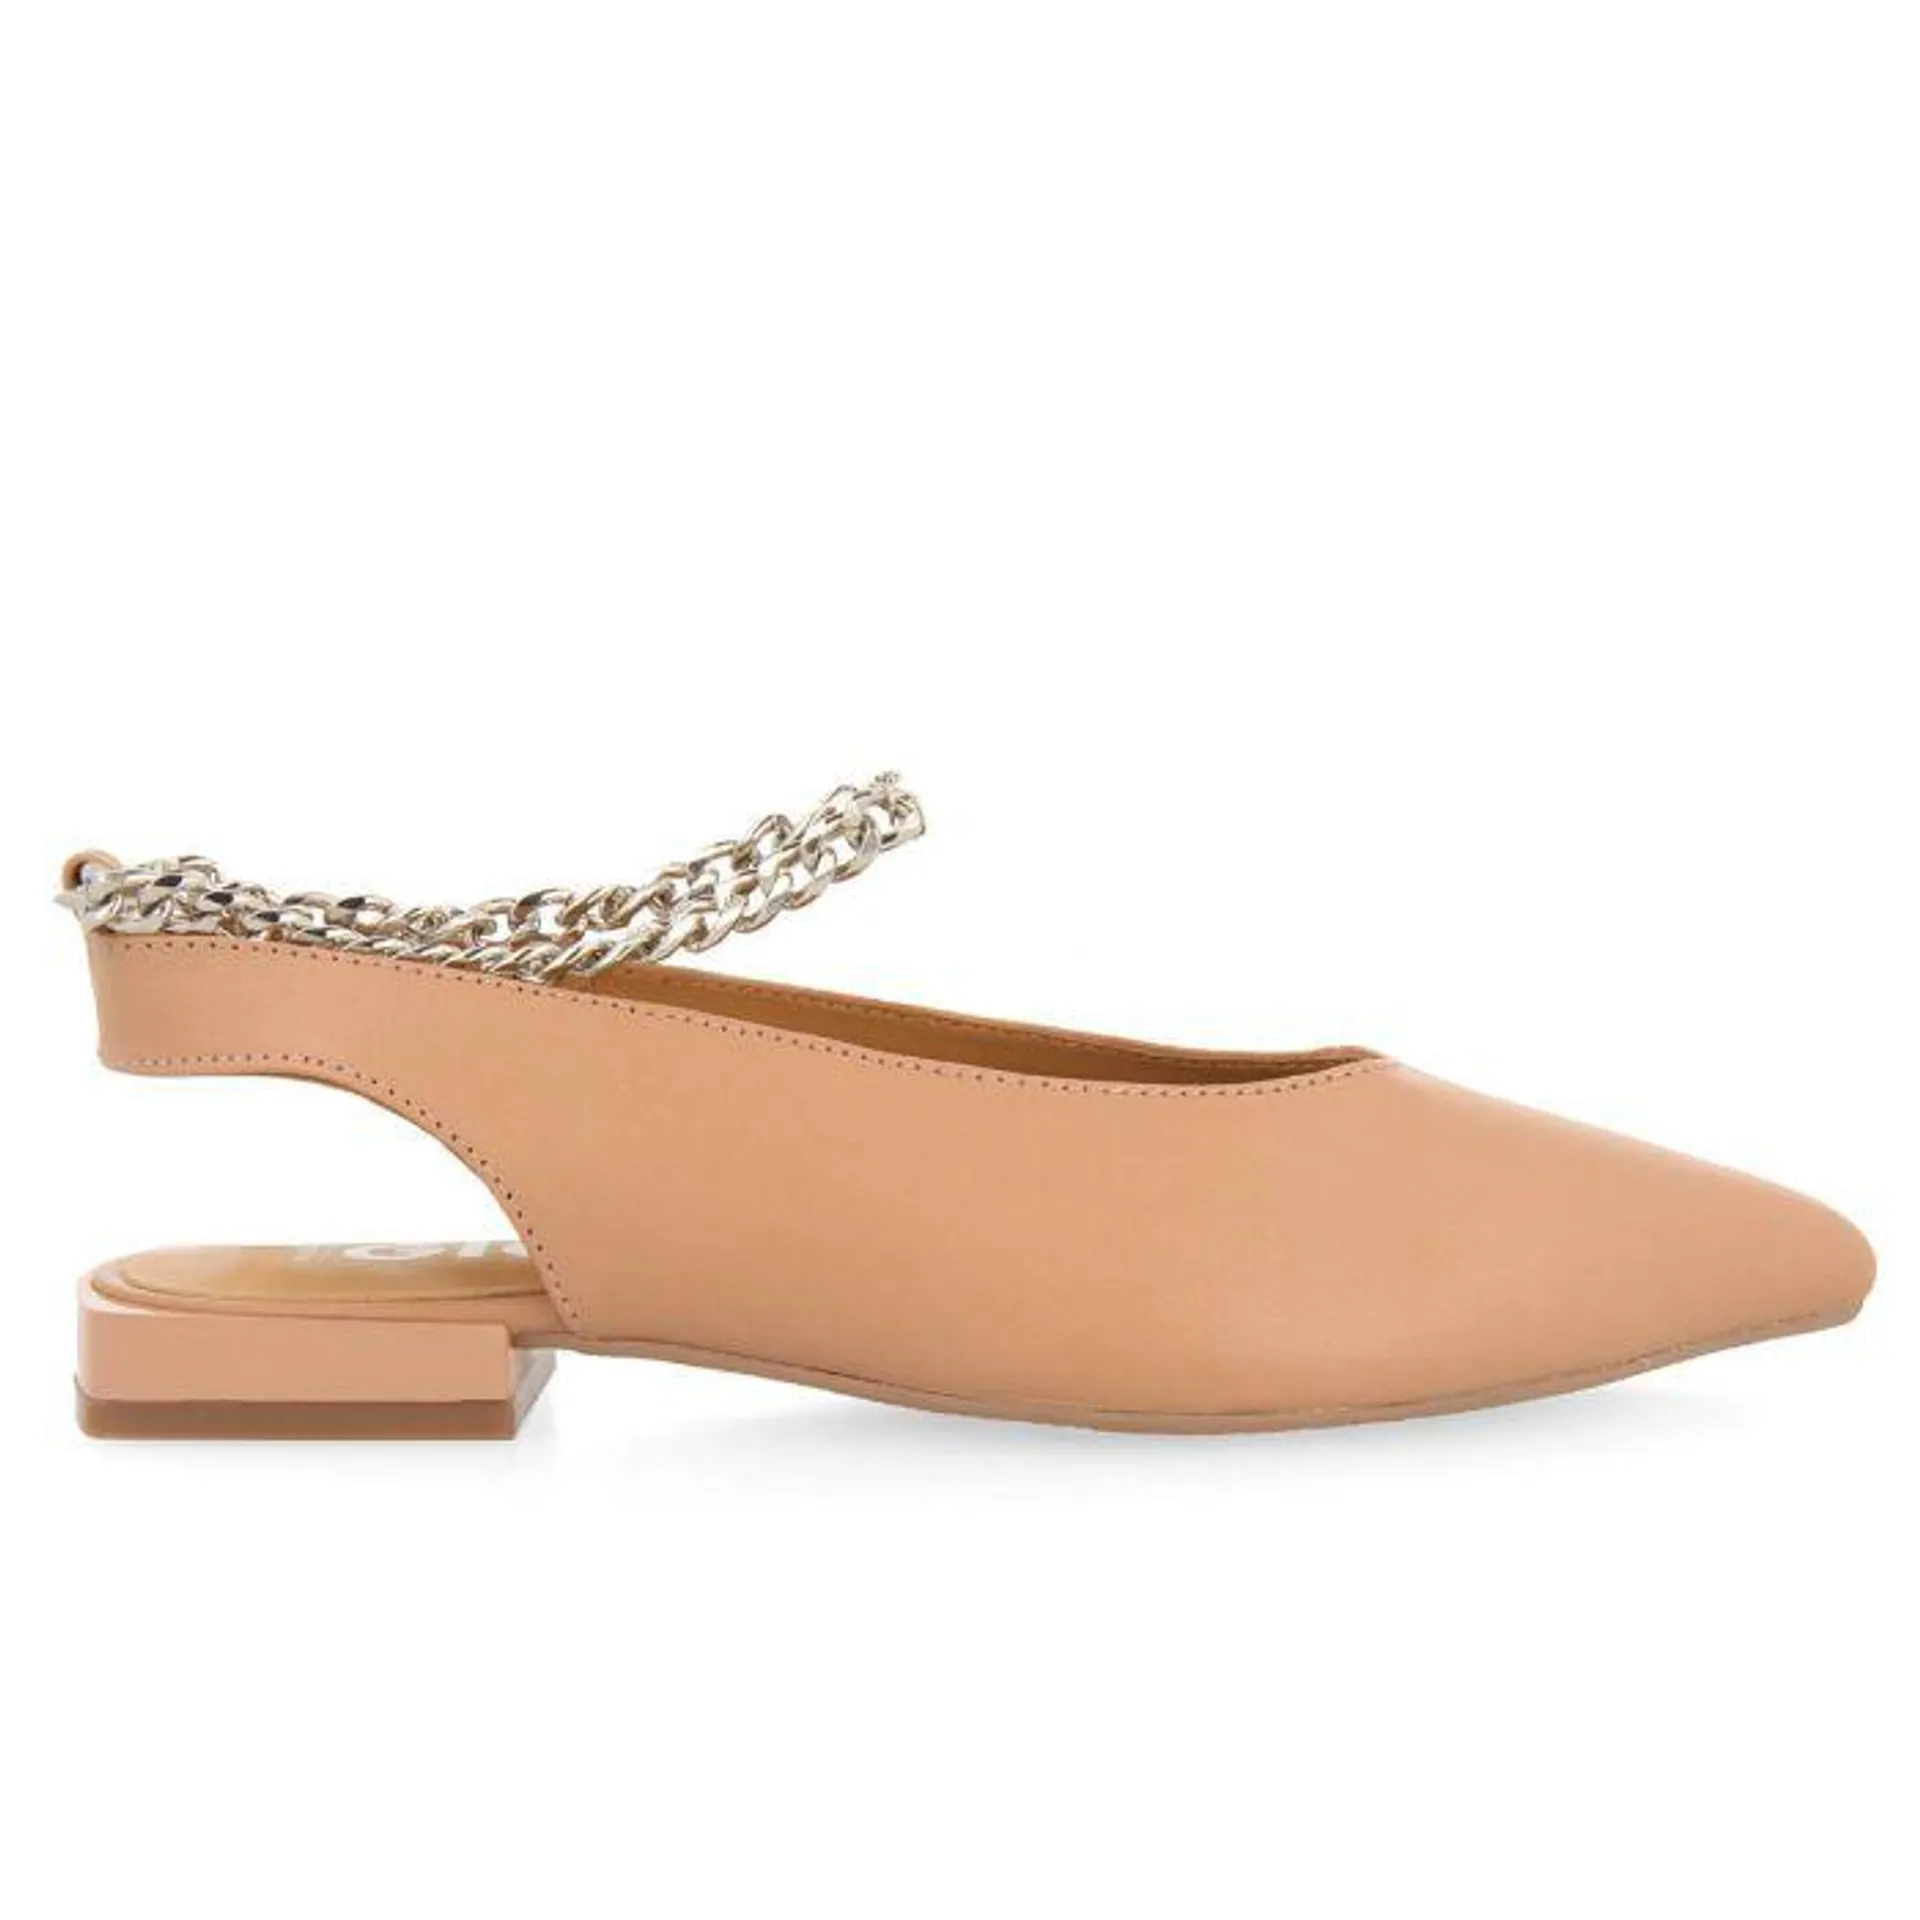 Palu women's nude slingback ballet flats with decorative chain